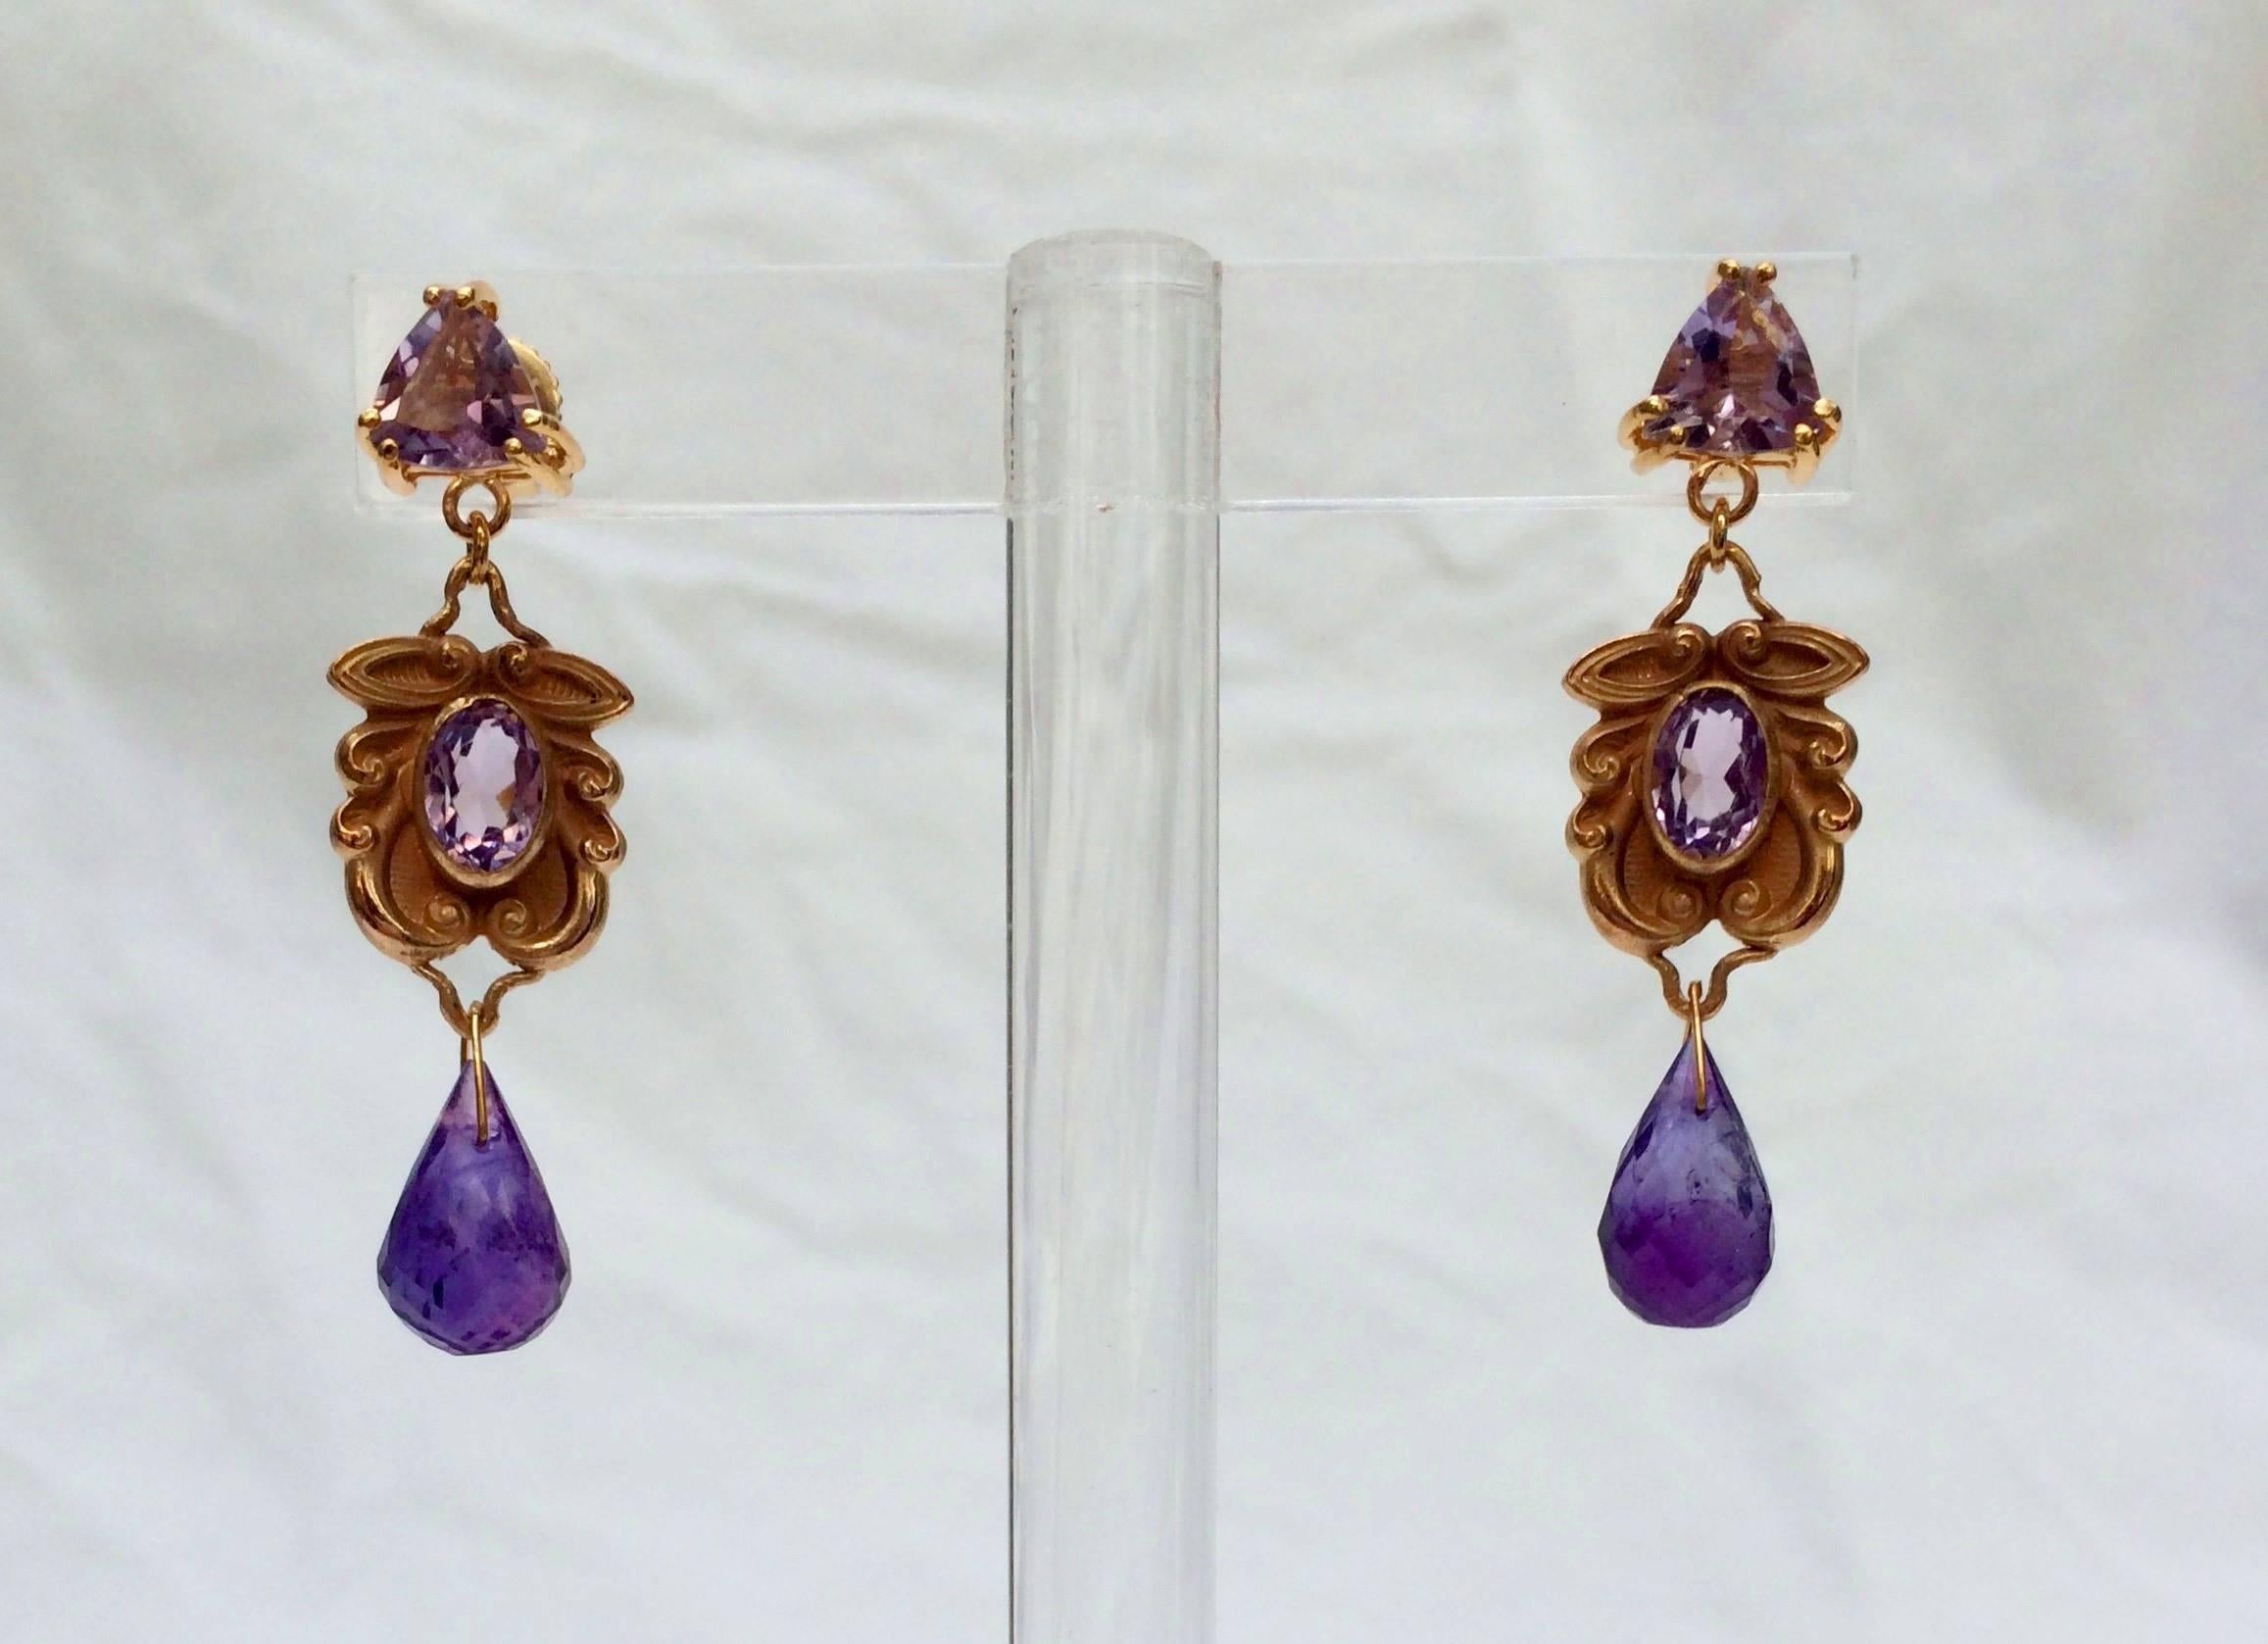 At the top of these unique and vibrant earrings is the stud and stone setting, made from 14 K rose gold, and of original Marina J design. The setting houses a faceted, triangular cut Amethyst stone. The center of the earrings are vintage 14 K Rose